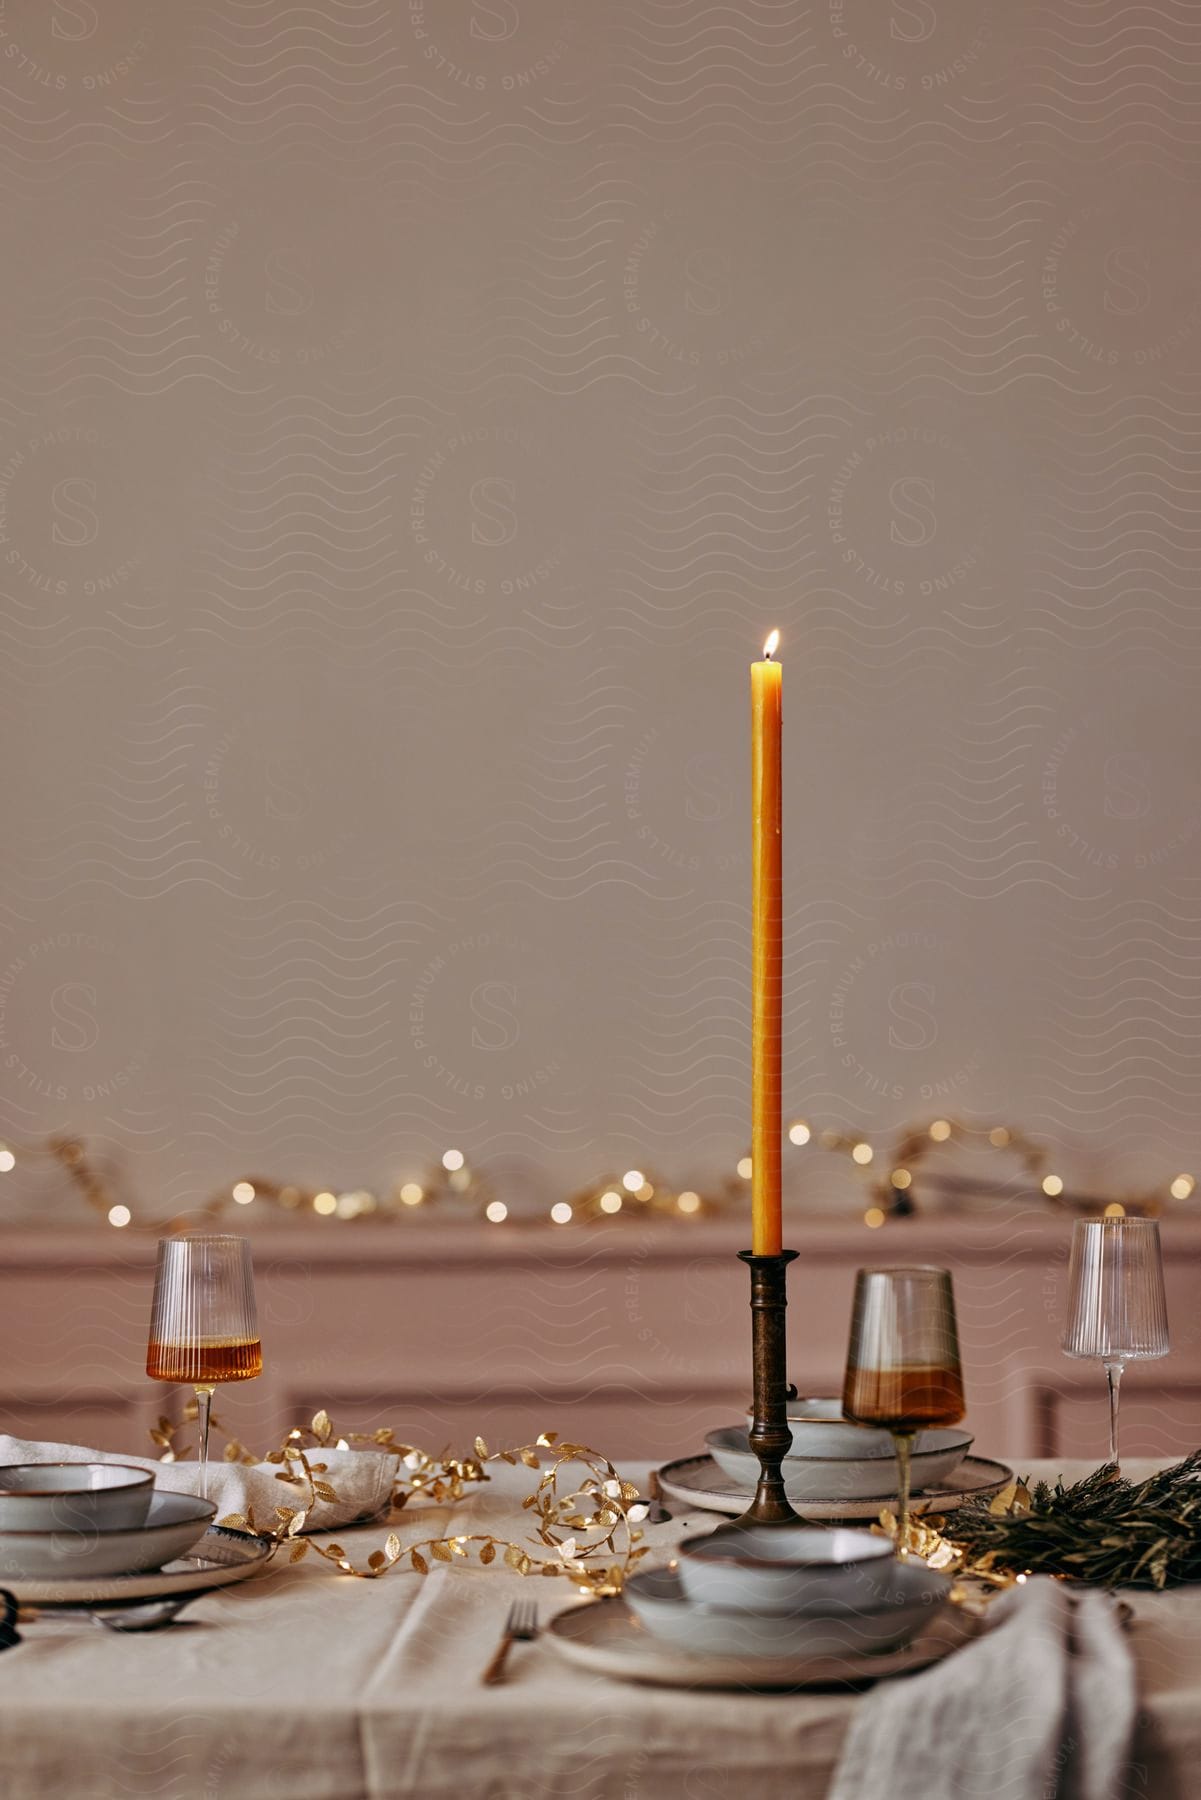 A candle sitting on a table with some dishes.